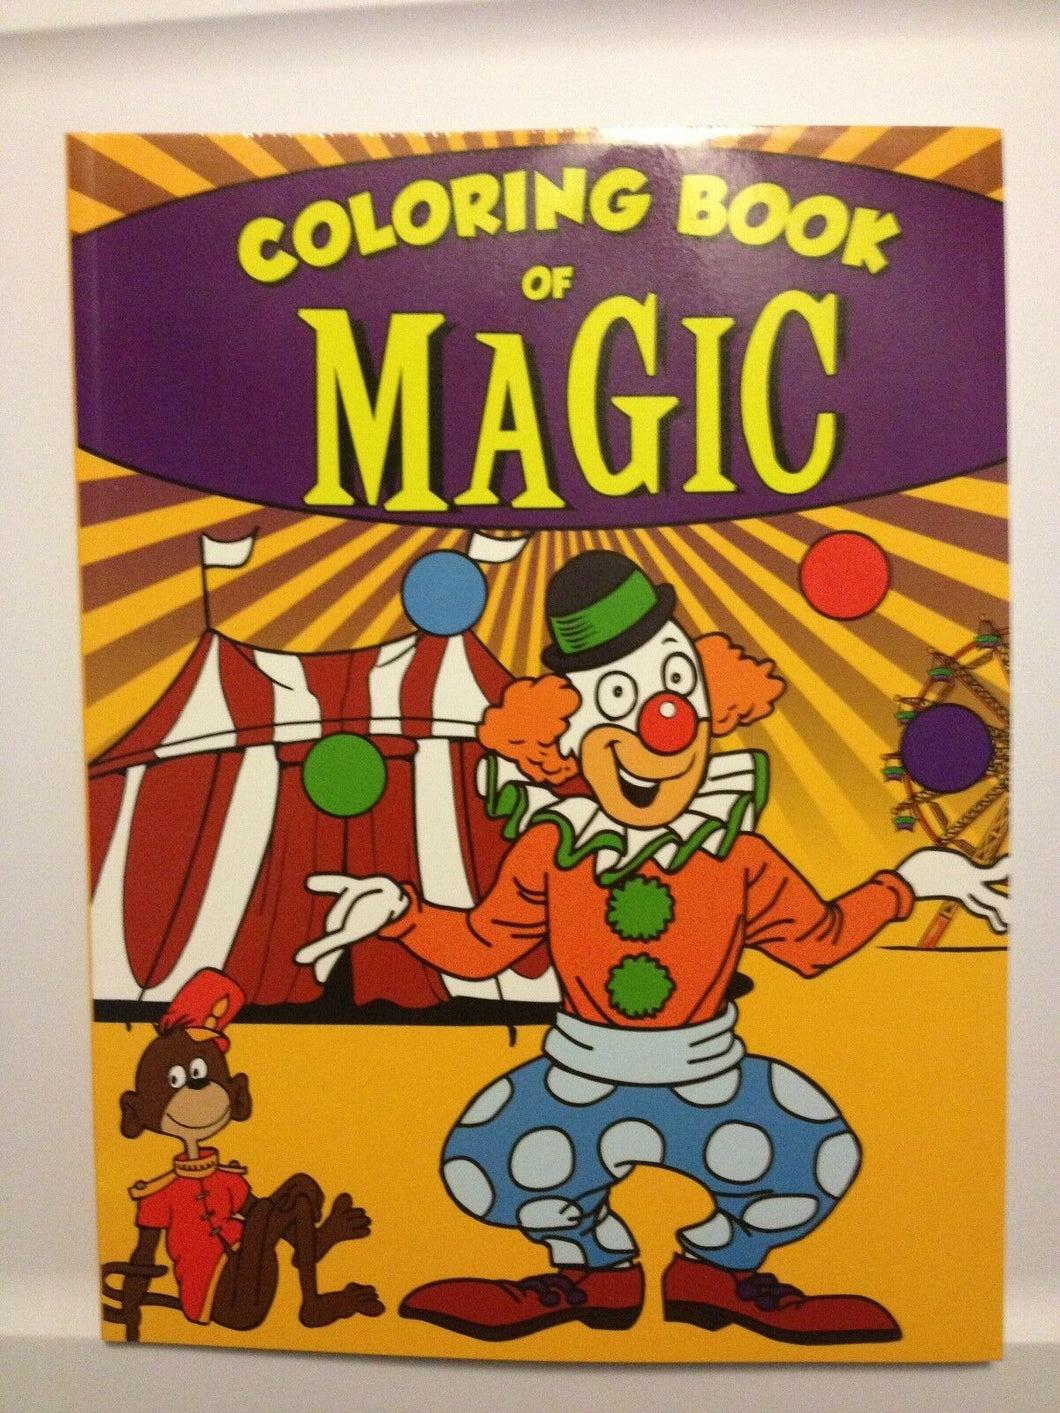 Sneaky Clown Magic Coloring Book - Great Magic for Children's Shows!